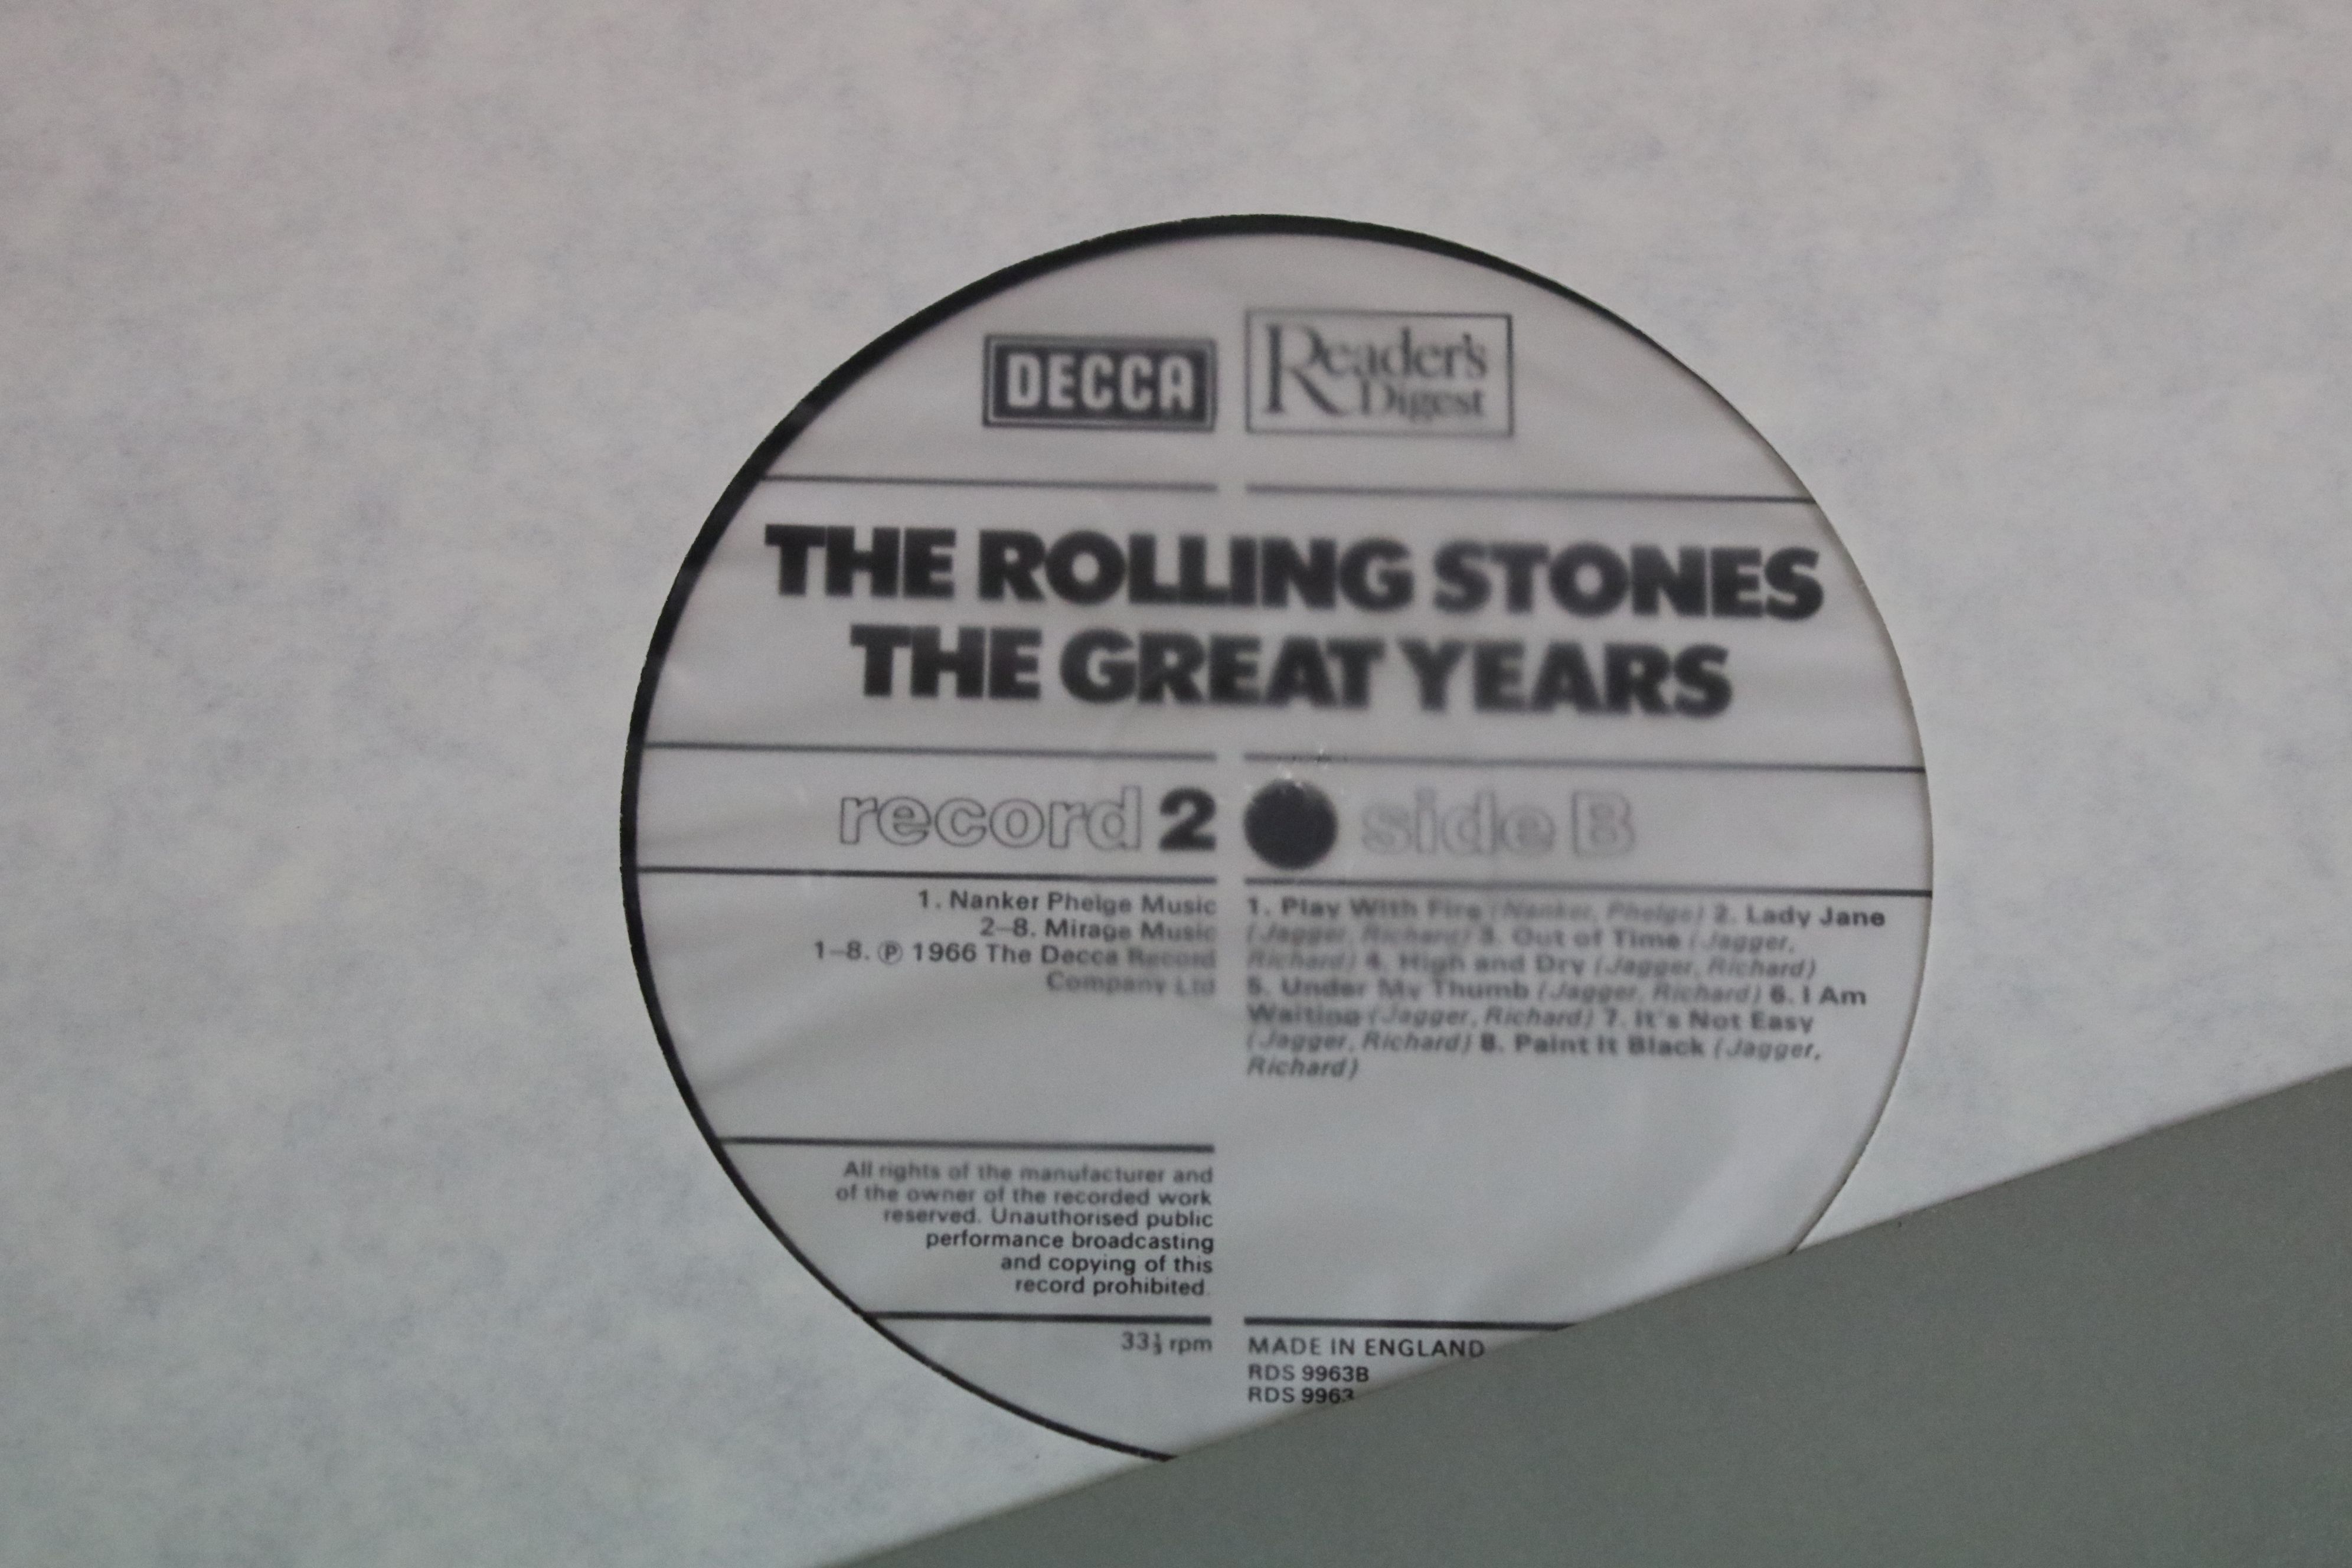 Vinyl - The Rolling Stones The Great Years Box Set on Readers Digest / Decca 4 LP Box Set, box, - Image 7 of 11